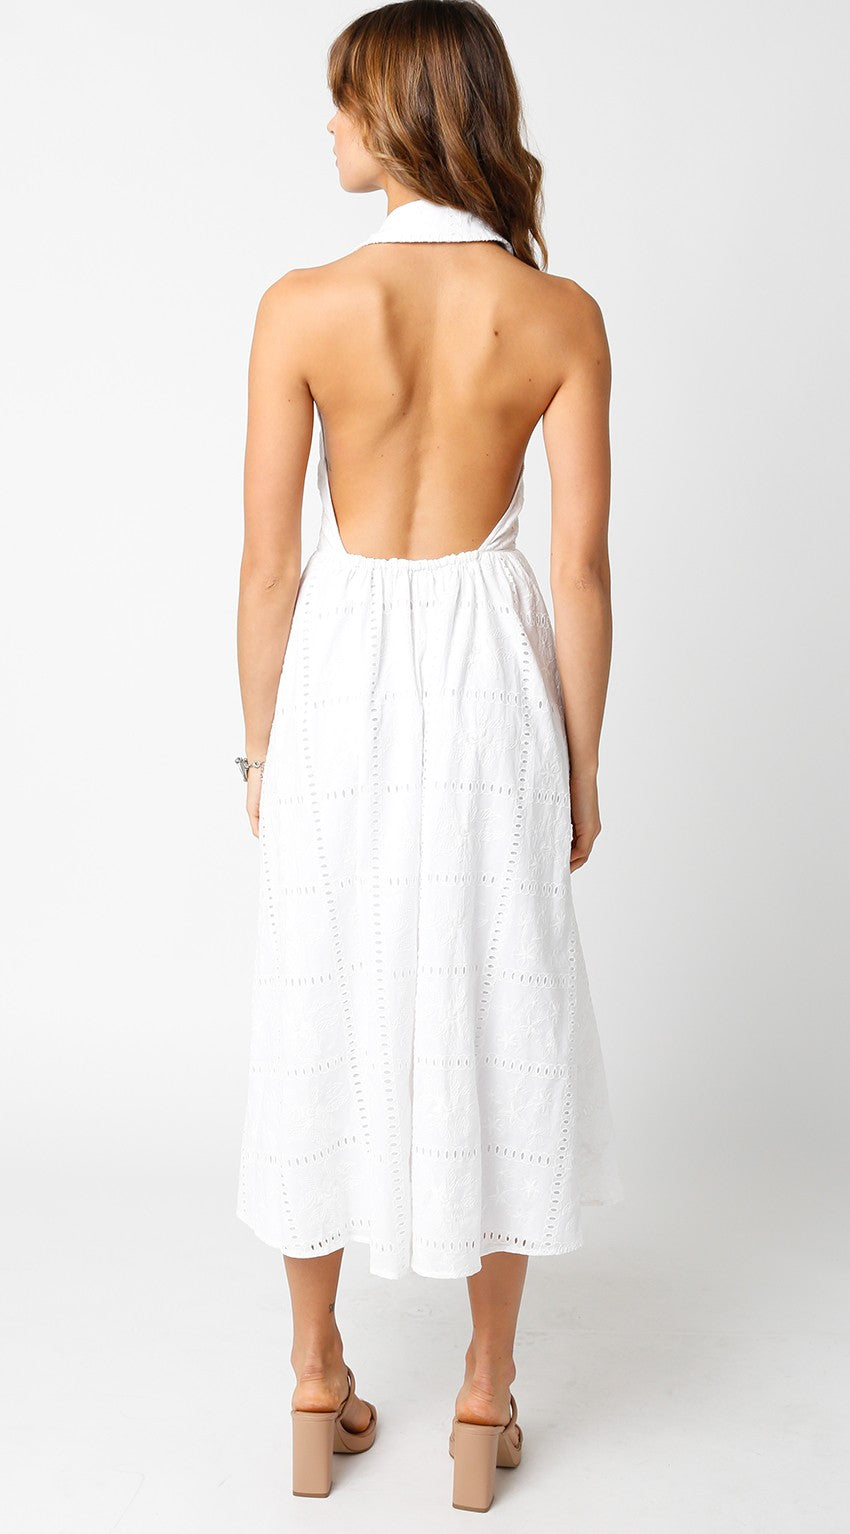 The ‘Perfect Summer Dress’